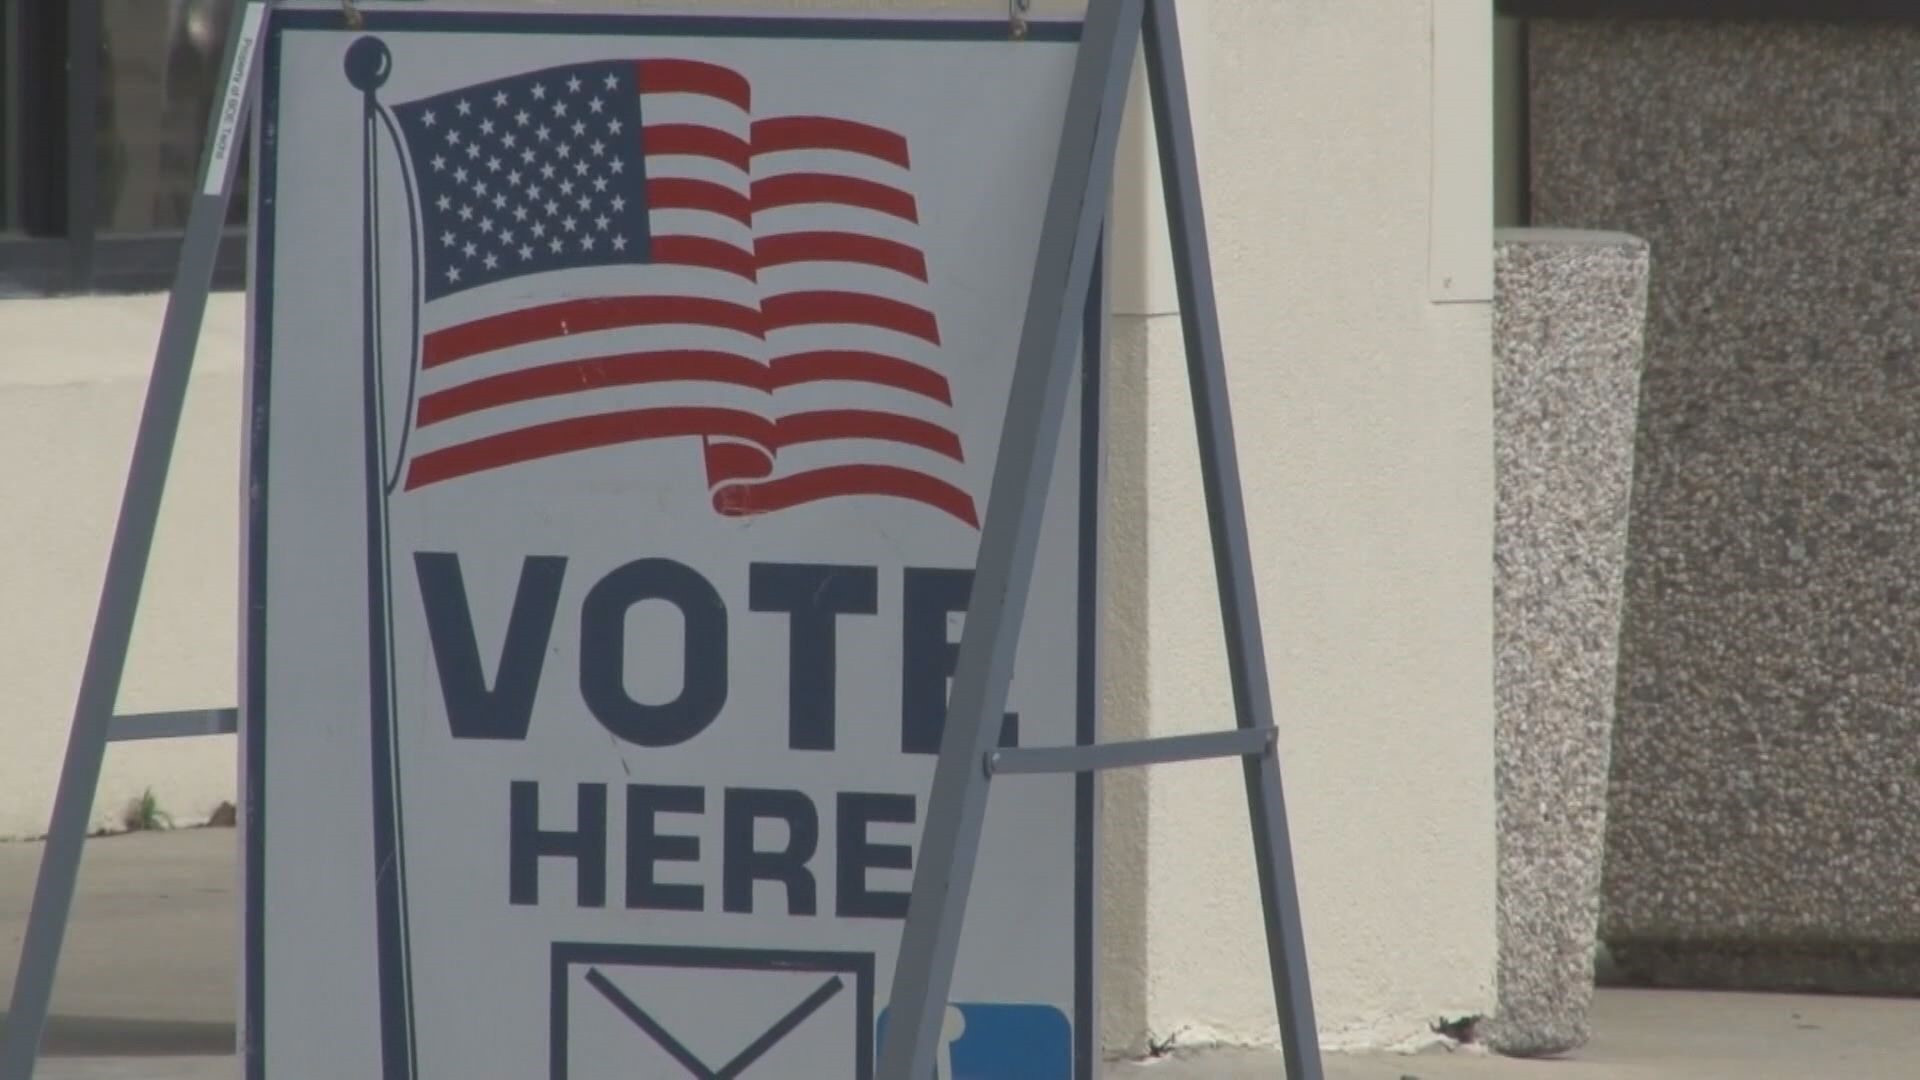 Elections supervisors expect steady crowds, smooth voting processes and same-day results for today's runoff